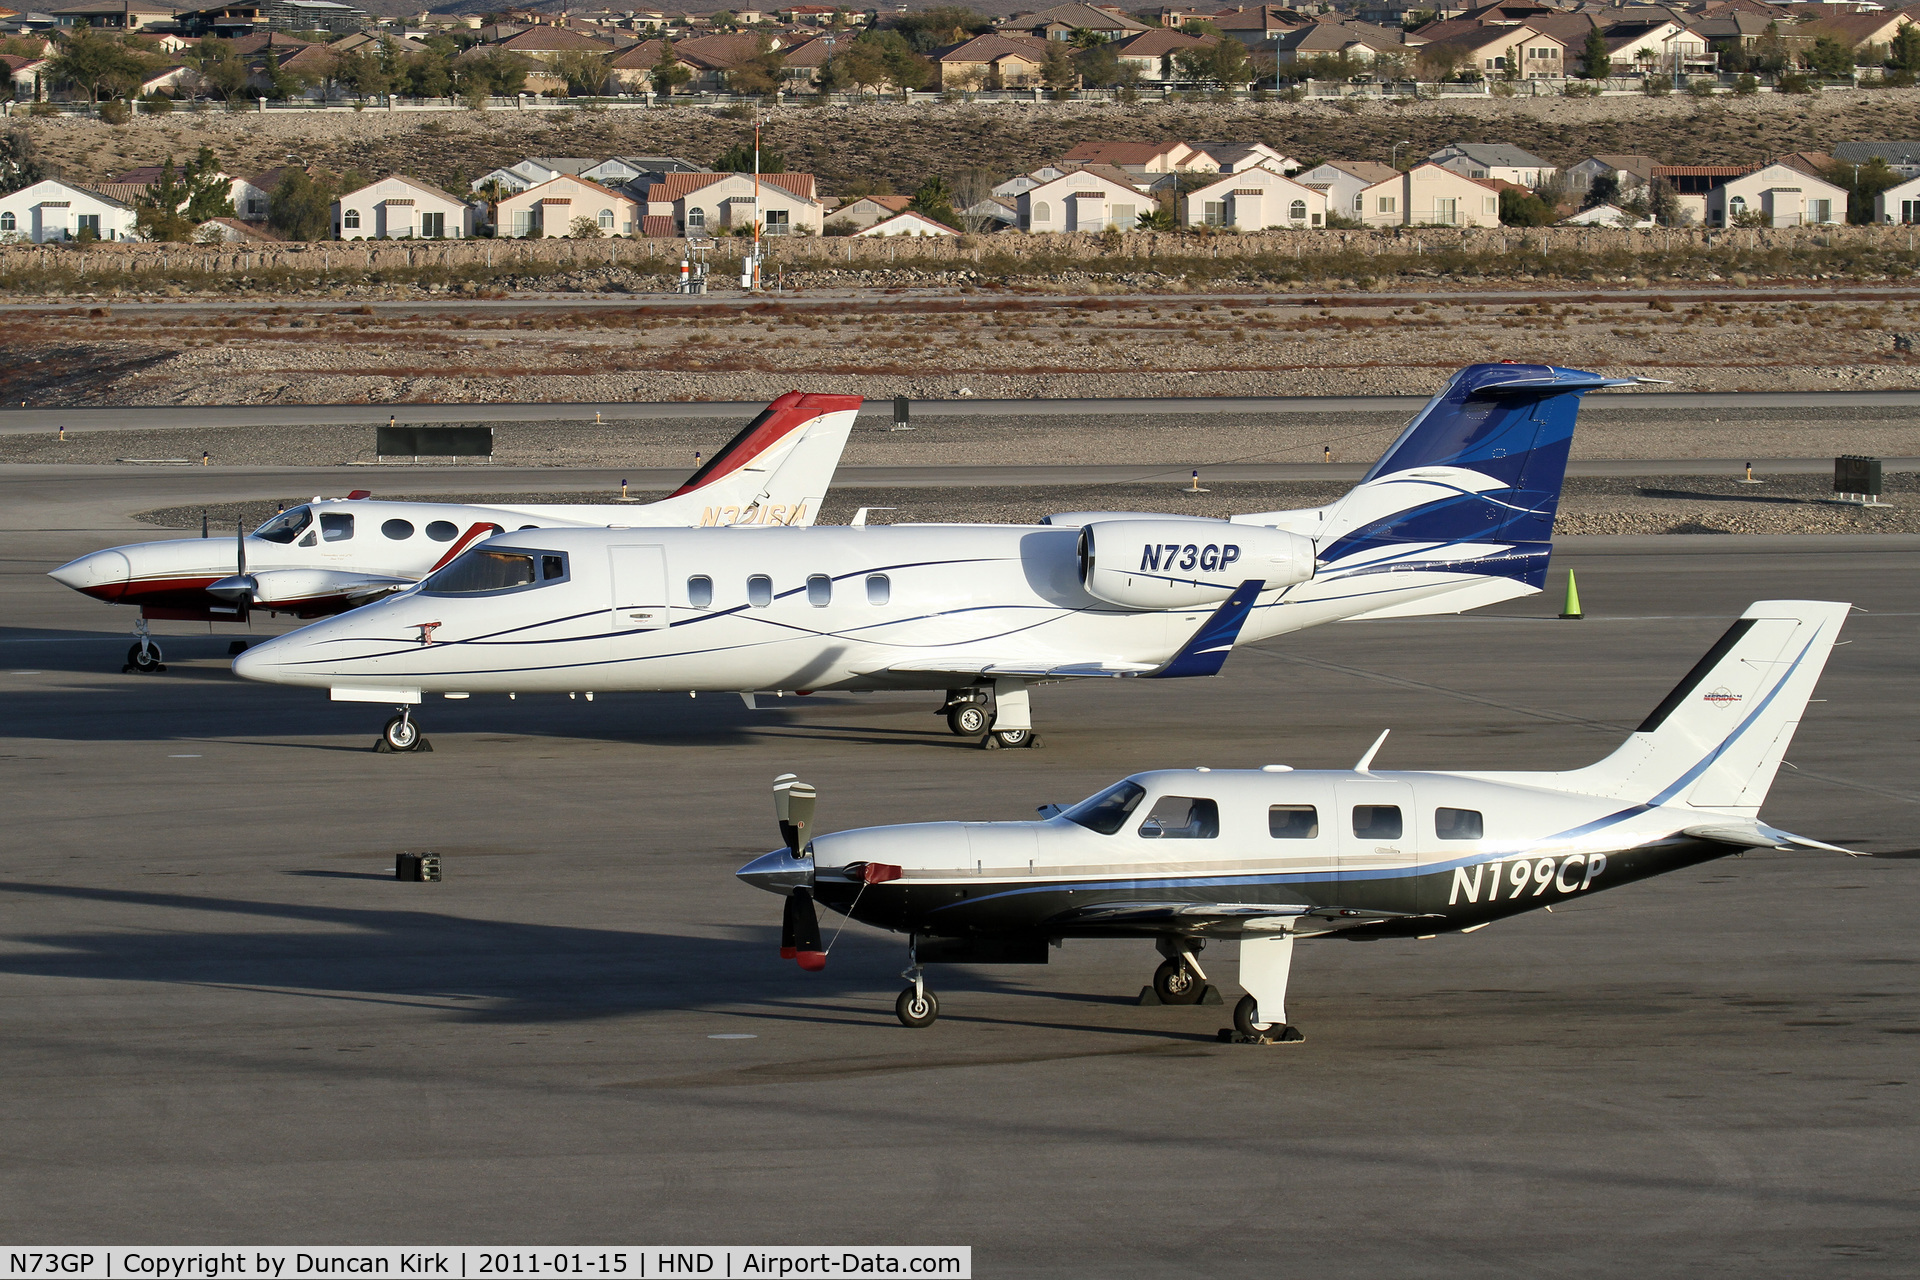 N73GP, 1986 Gates Learjet 55B C/N 55-127, N73GP shares the ramp with other corporate aircraft at Henderson, NV